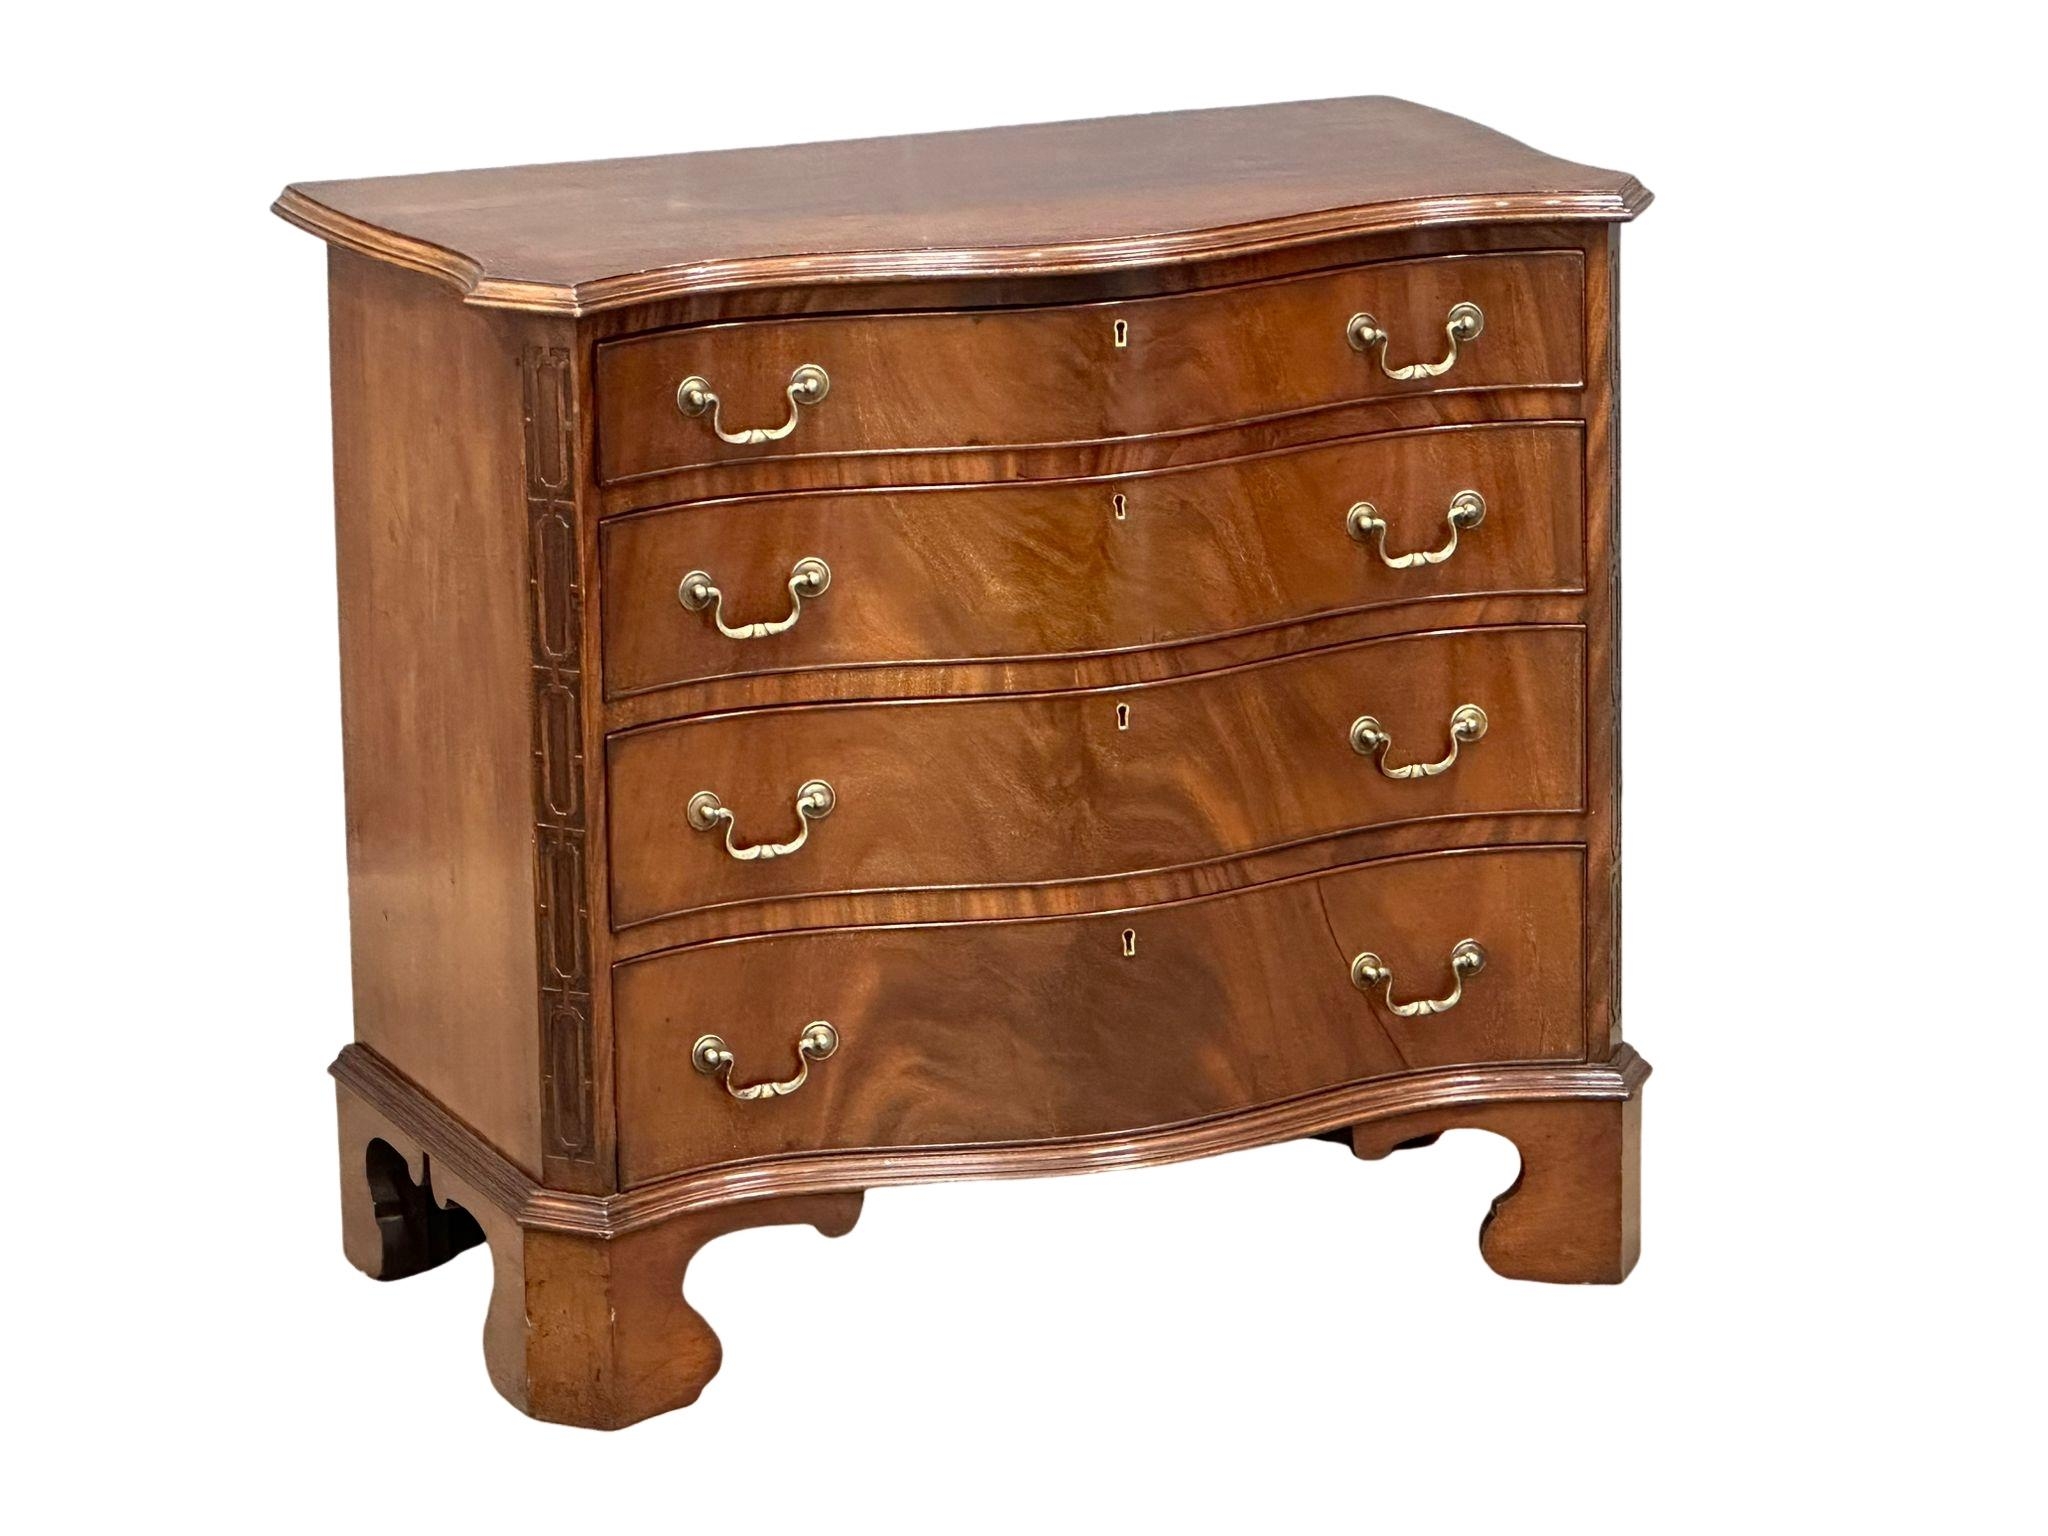 A good quality late 19th century Chippendale Revival mahogany serpentine front chest of drawers. - Image 18 of 22